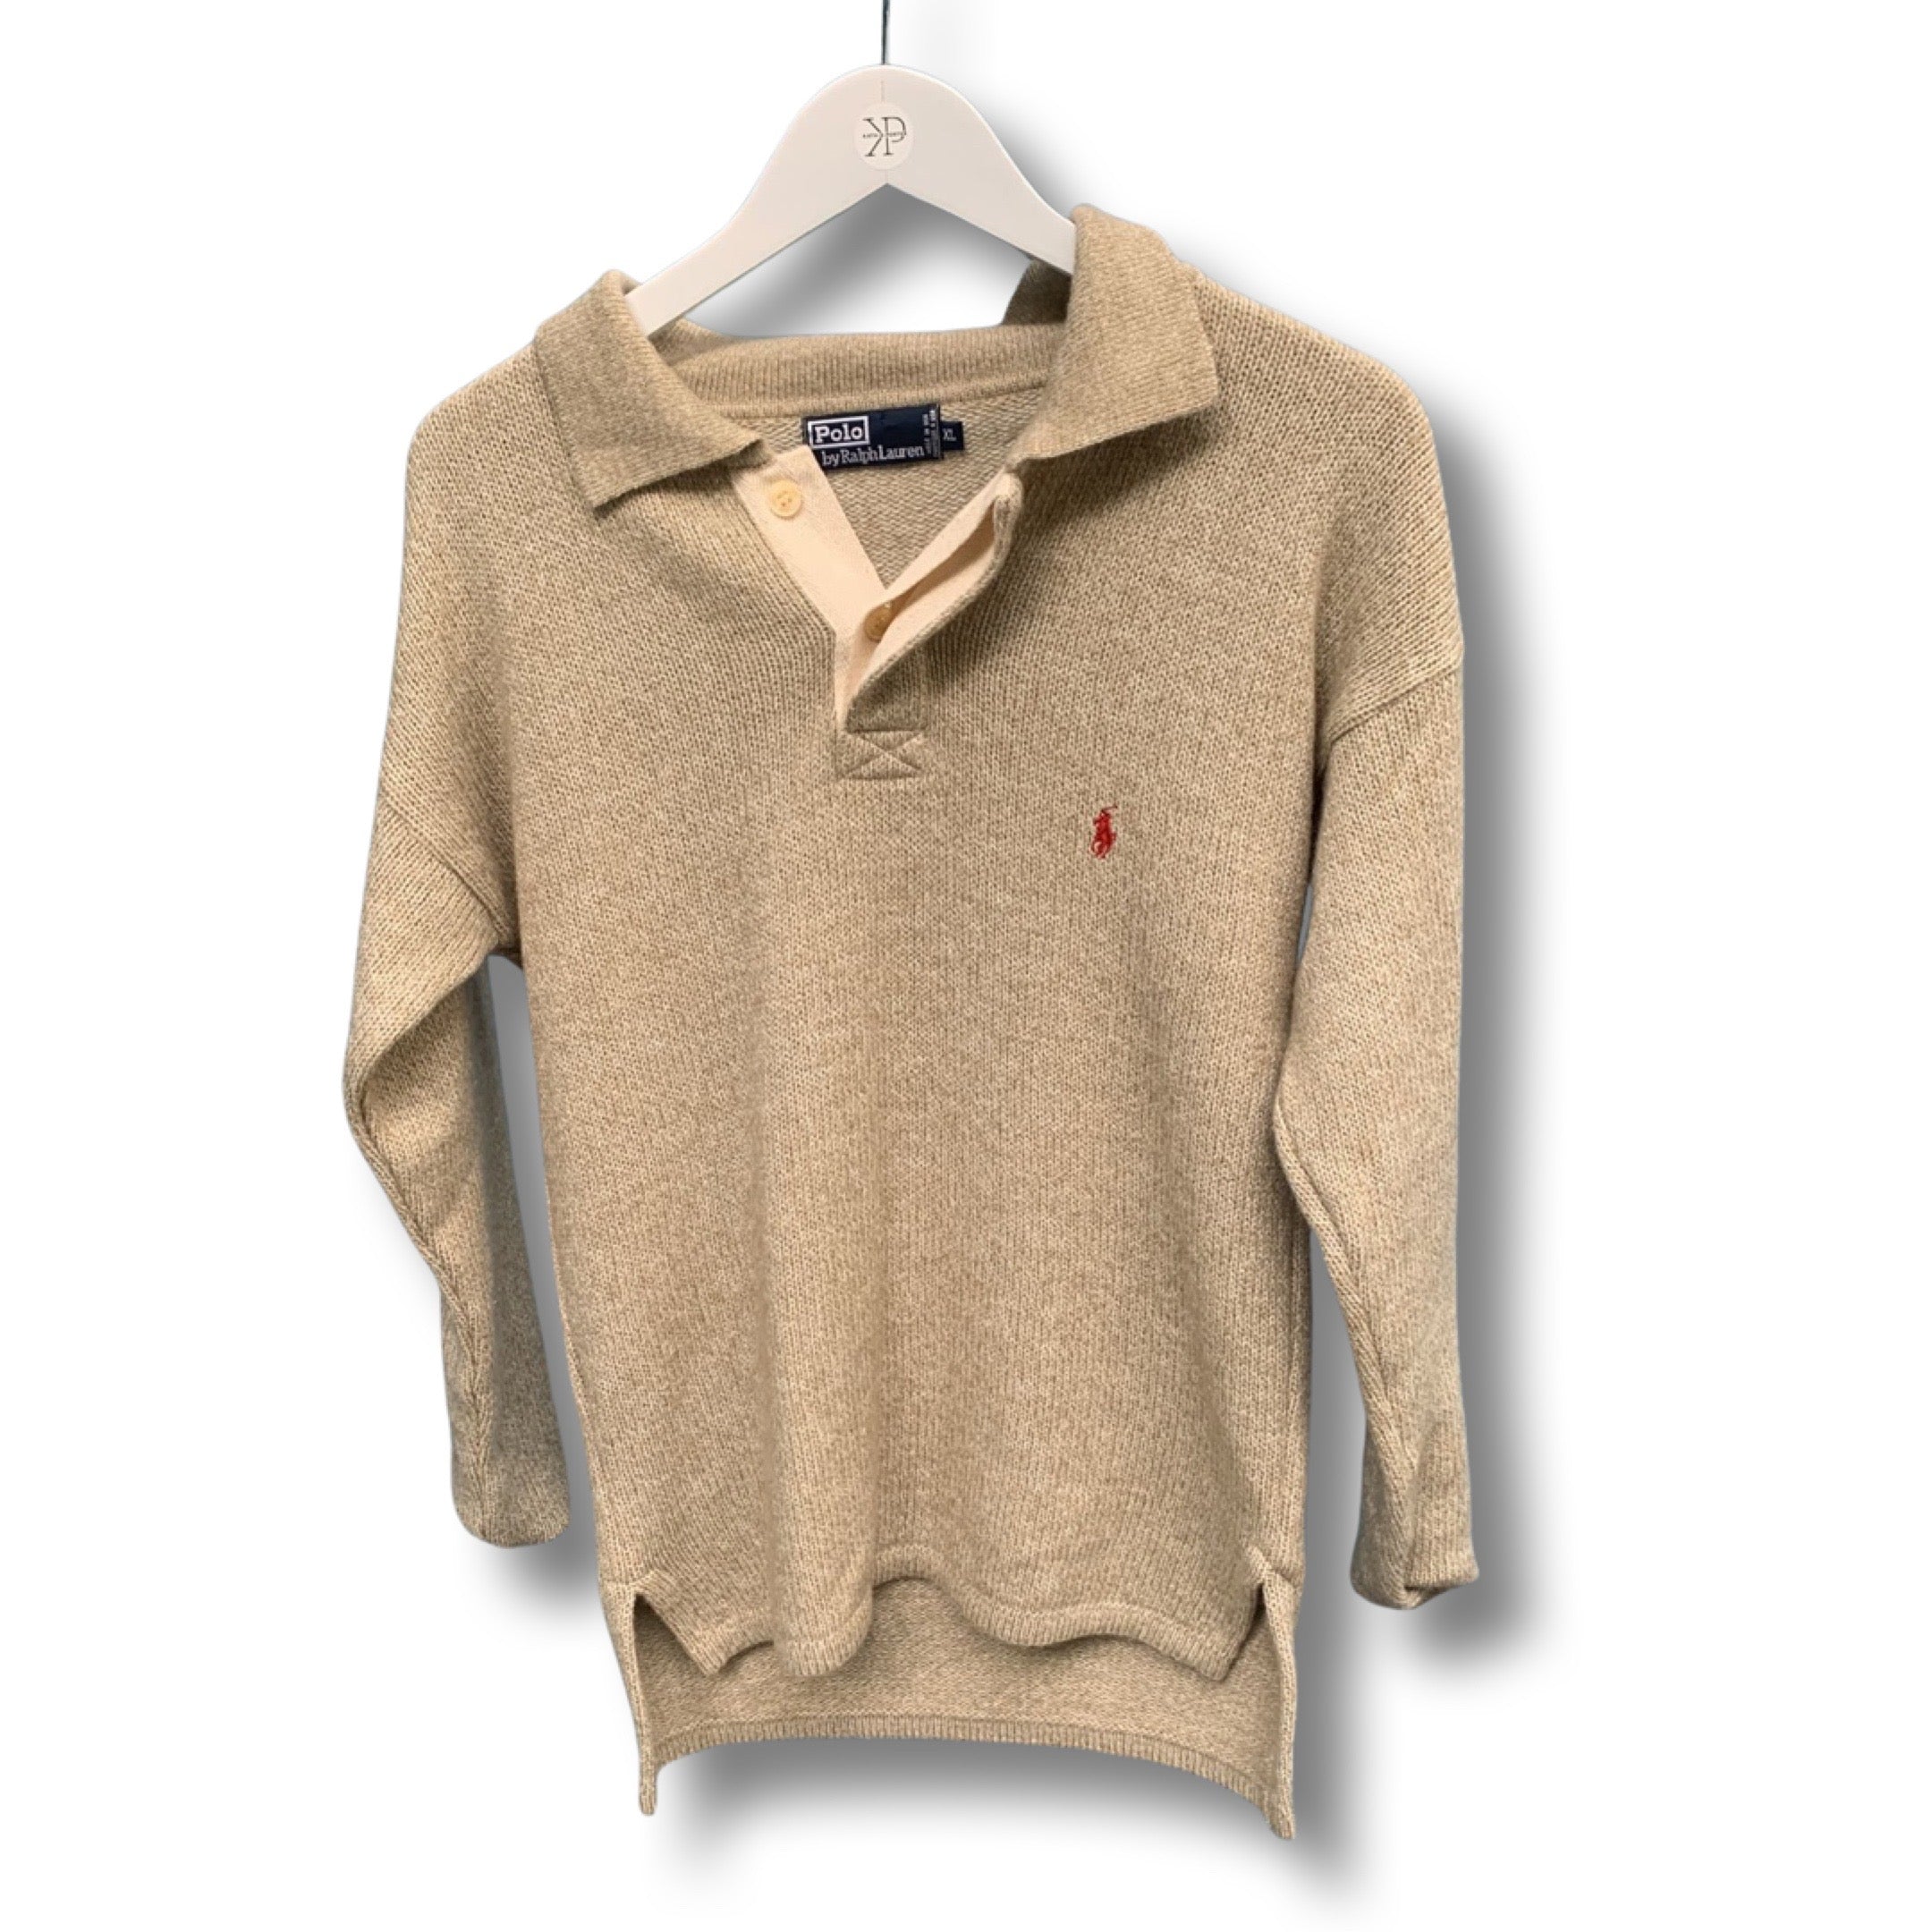 Rugby sweater by Polo Ralph Lauren.